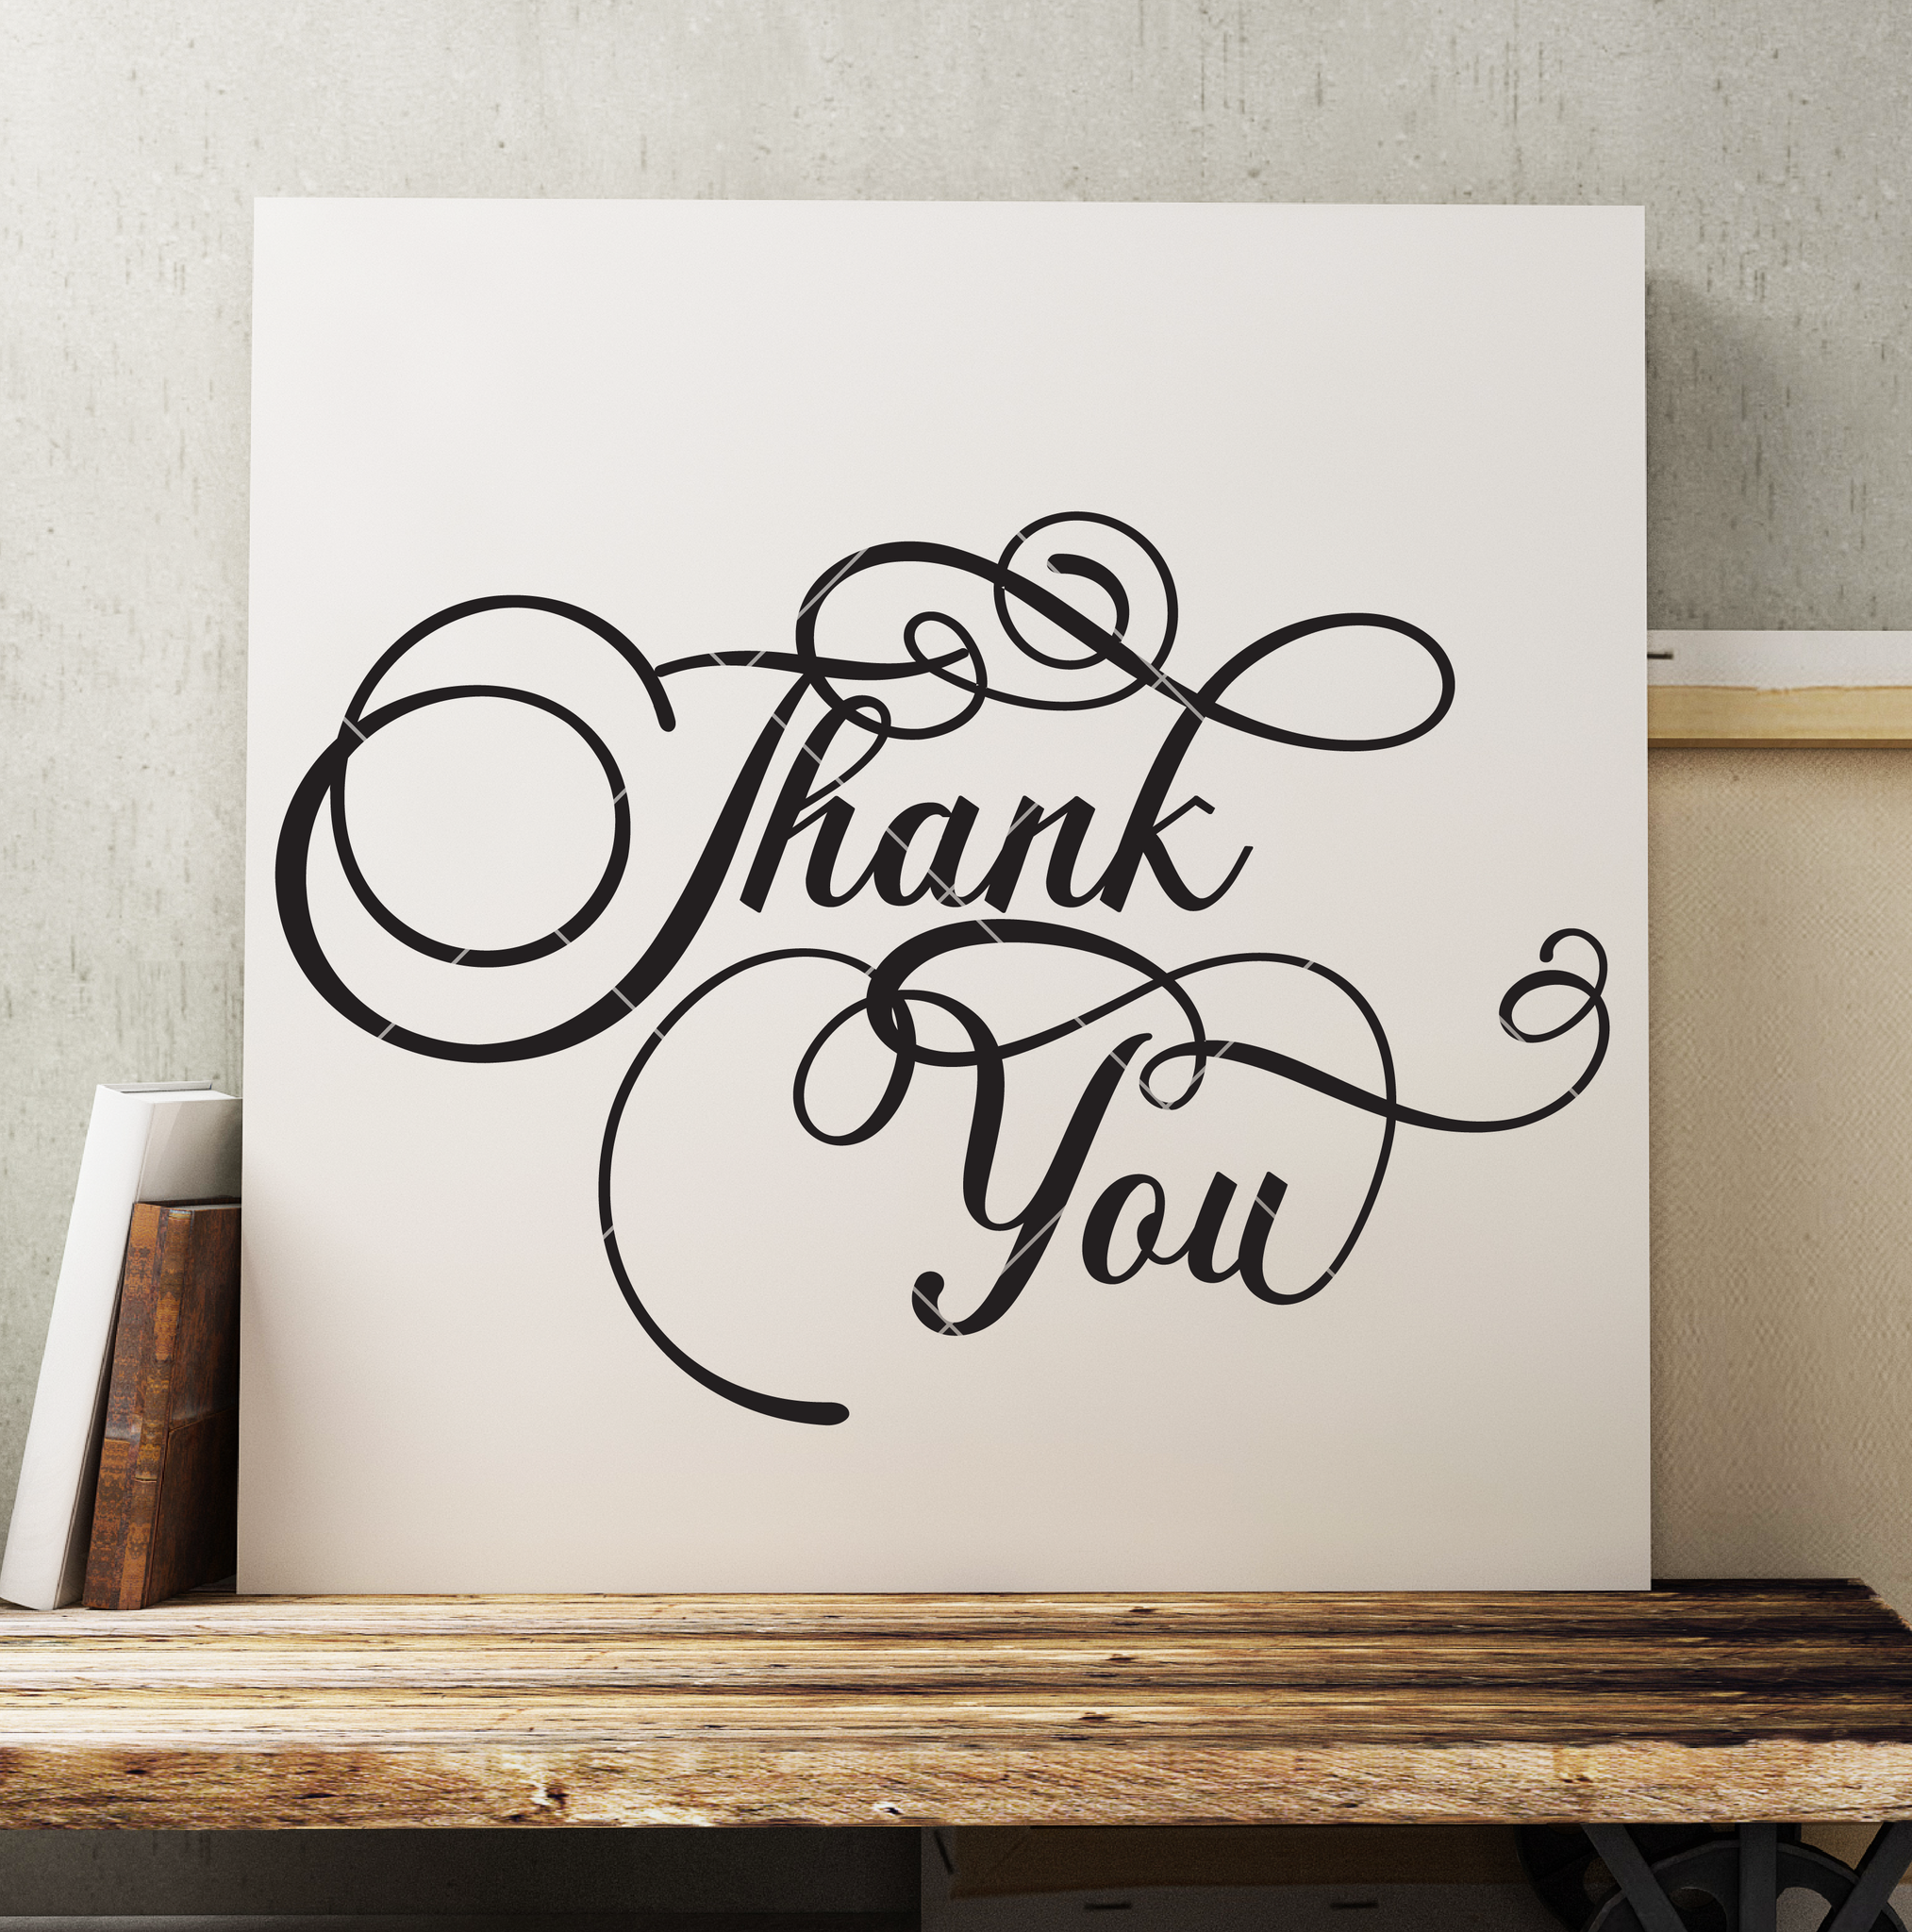 Thank You SVG File for Cricut/Silhouette (WS6) - Commercial Use SVG Files for Cricut & Silhouette